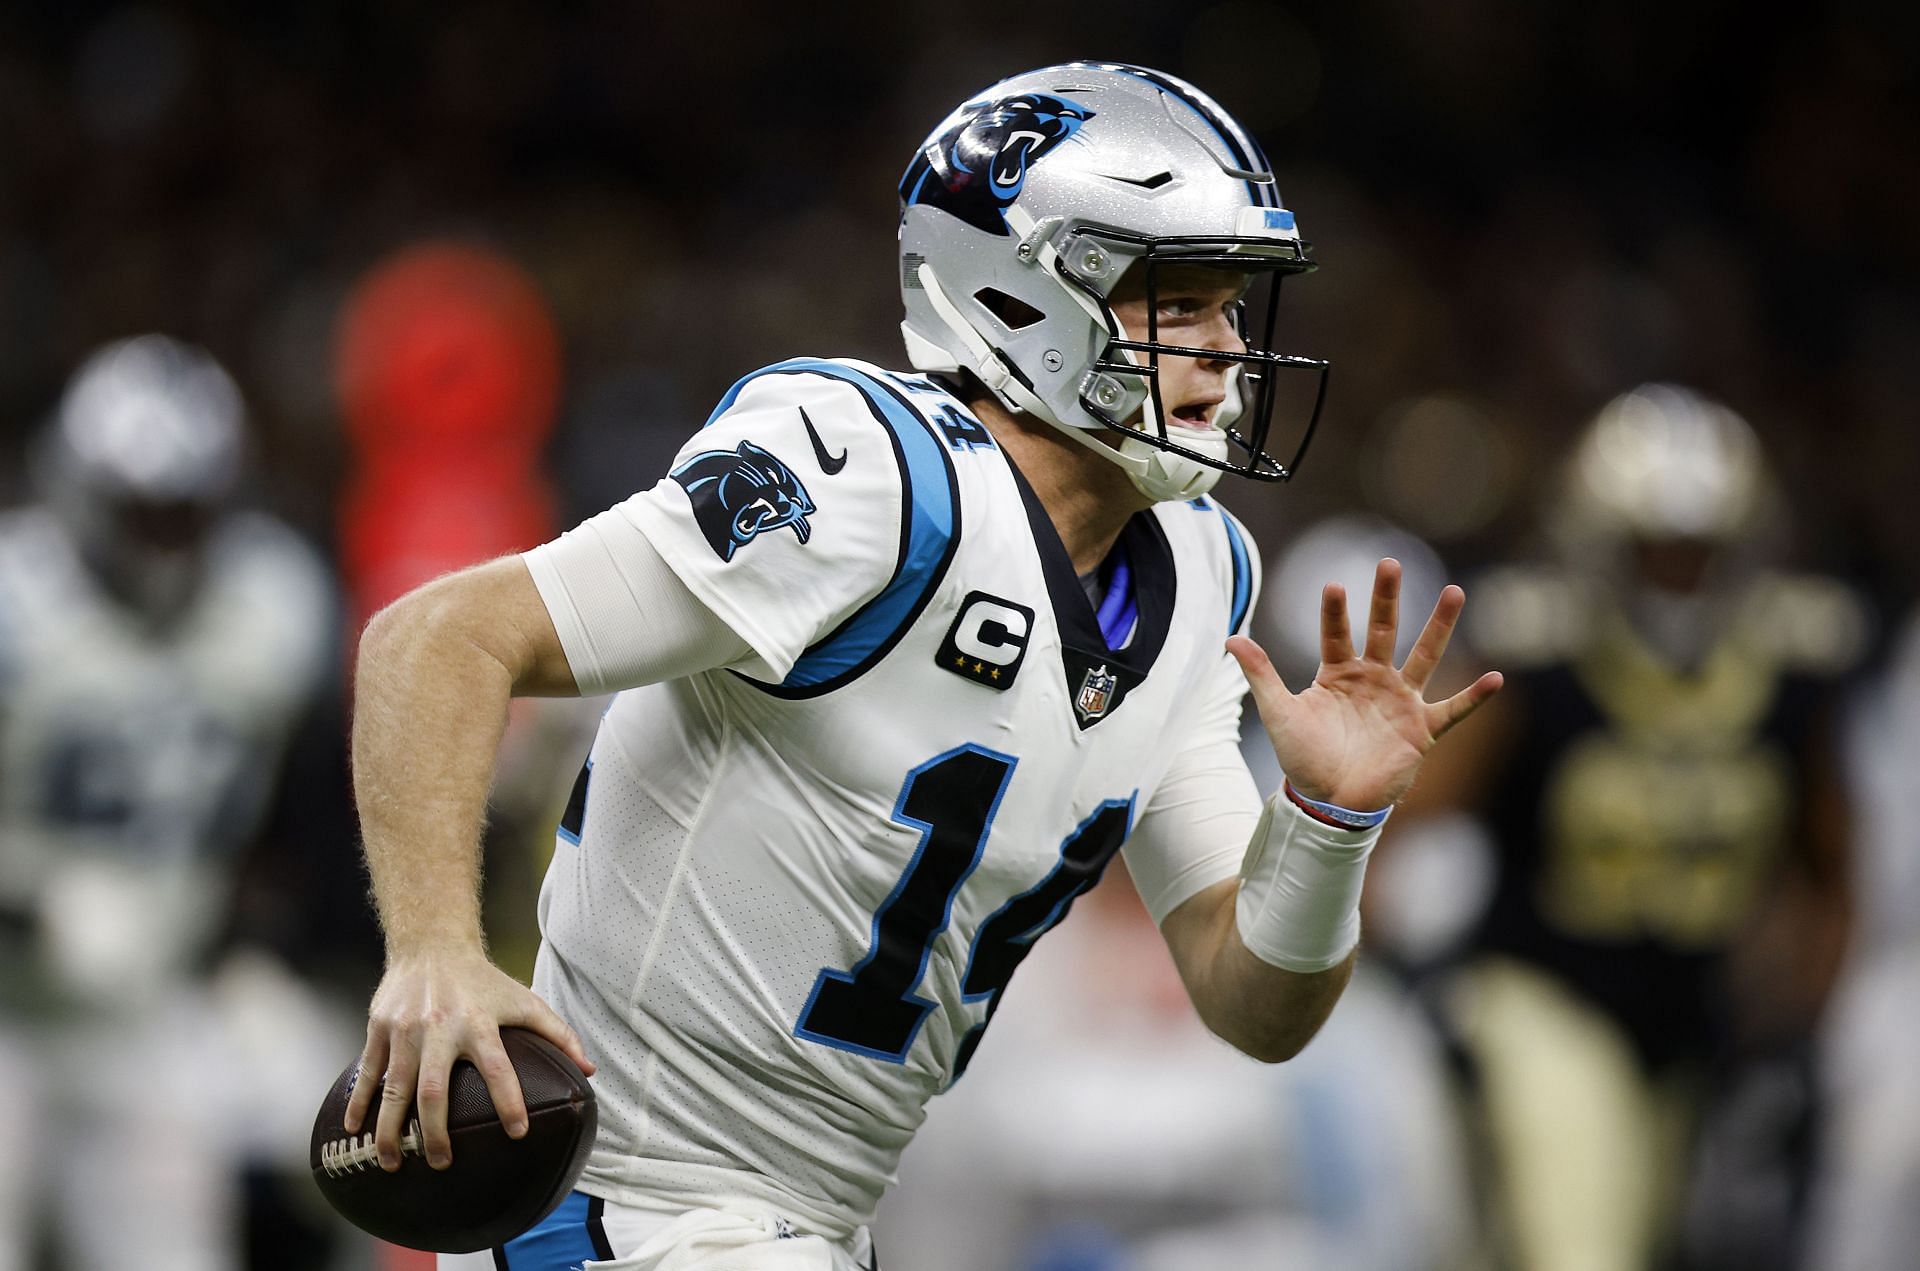 After a hot start, Darnold is faced with questions about his NFL career after a brutal finish in Carolina (Photo: Getty)